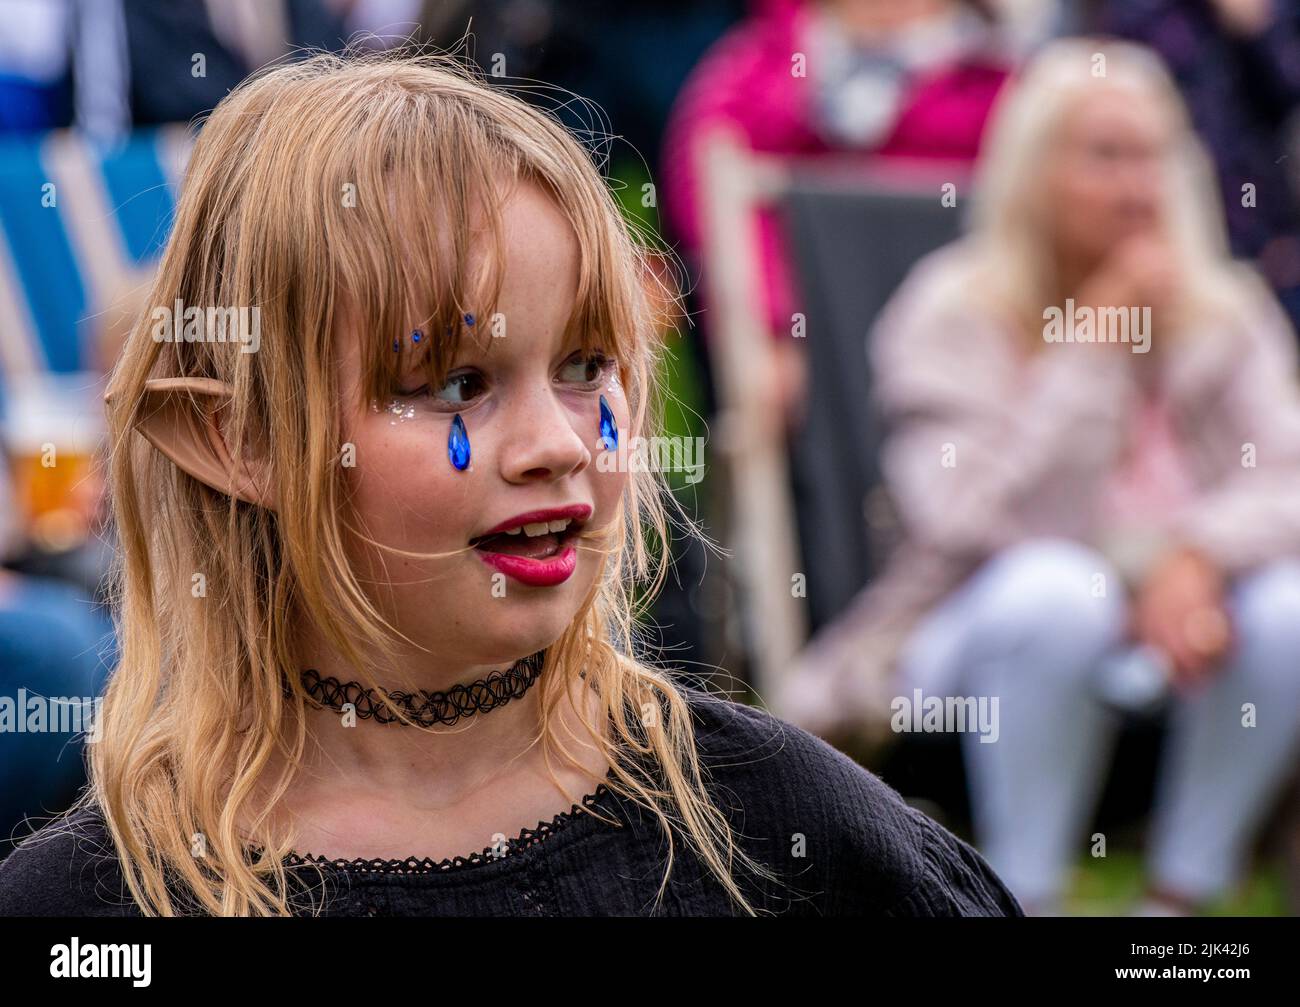 Harrogate, 30th July 2022. The Harrogate Carnival is taking place today under gloomy skies. A young girl is made up for the occasion. Picture Credit: ernesto rogata/Alamy Live News Stock Photo